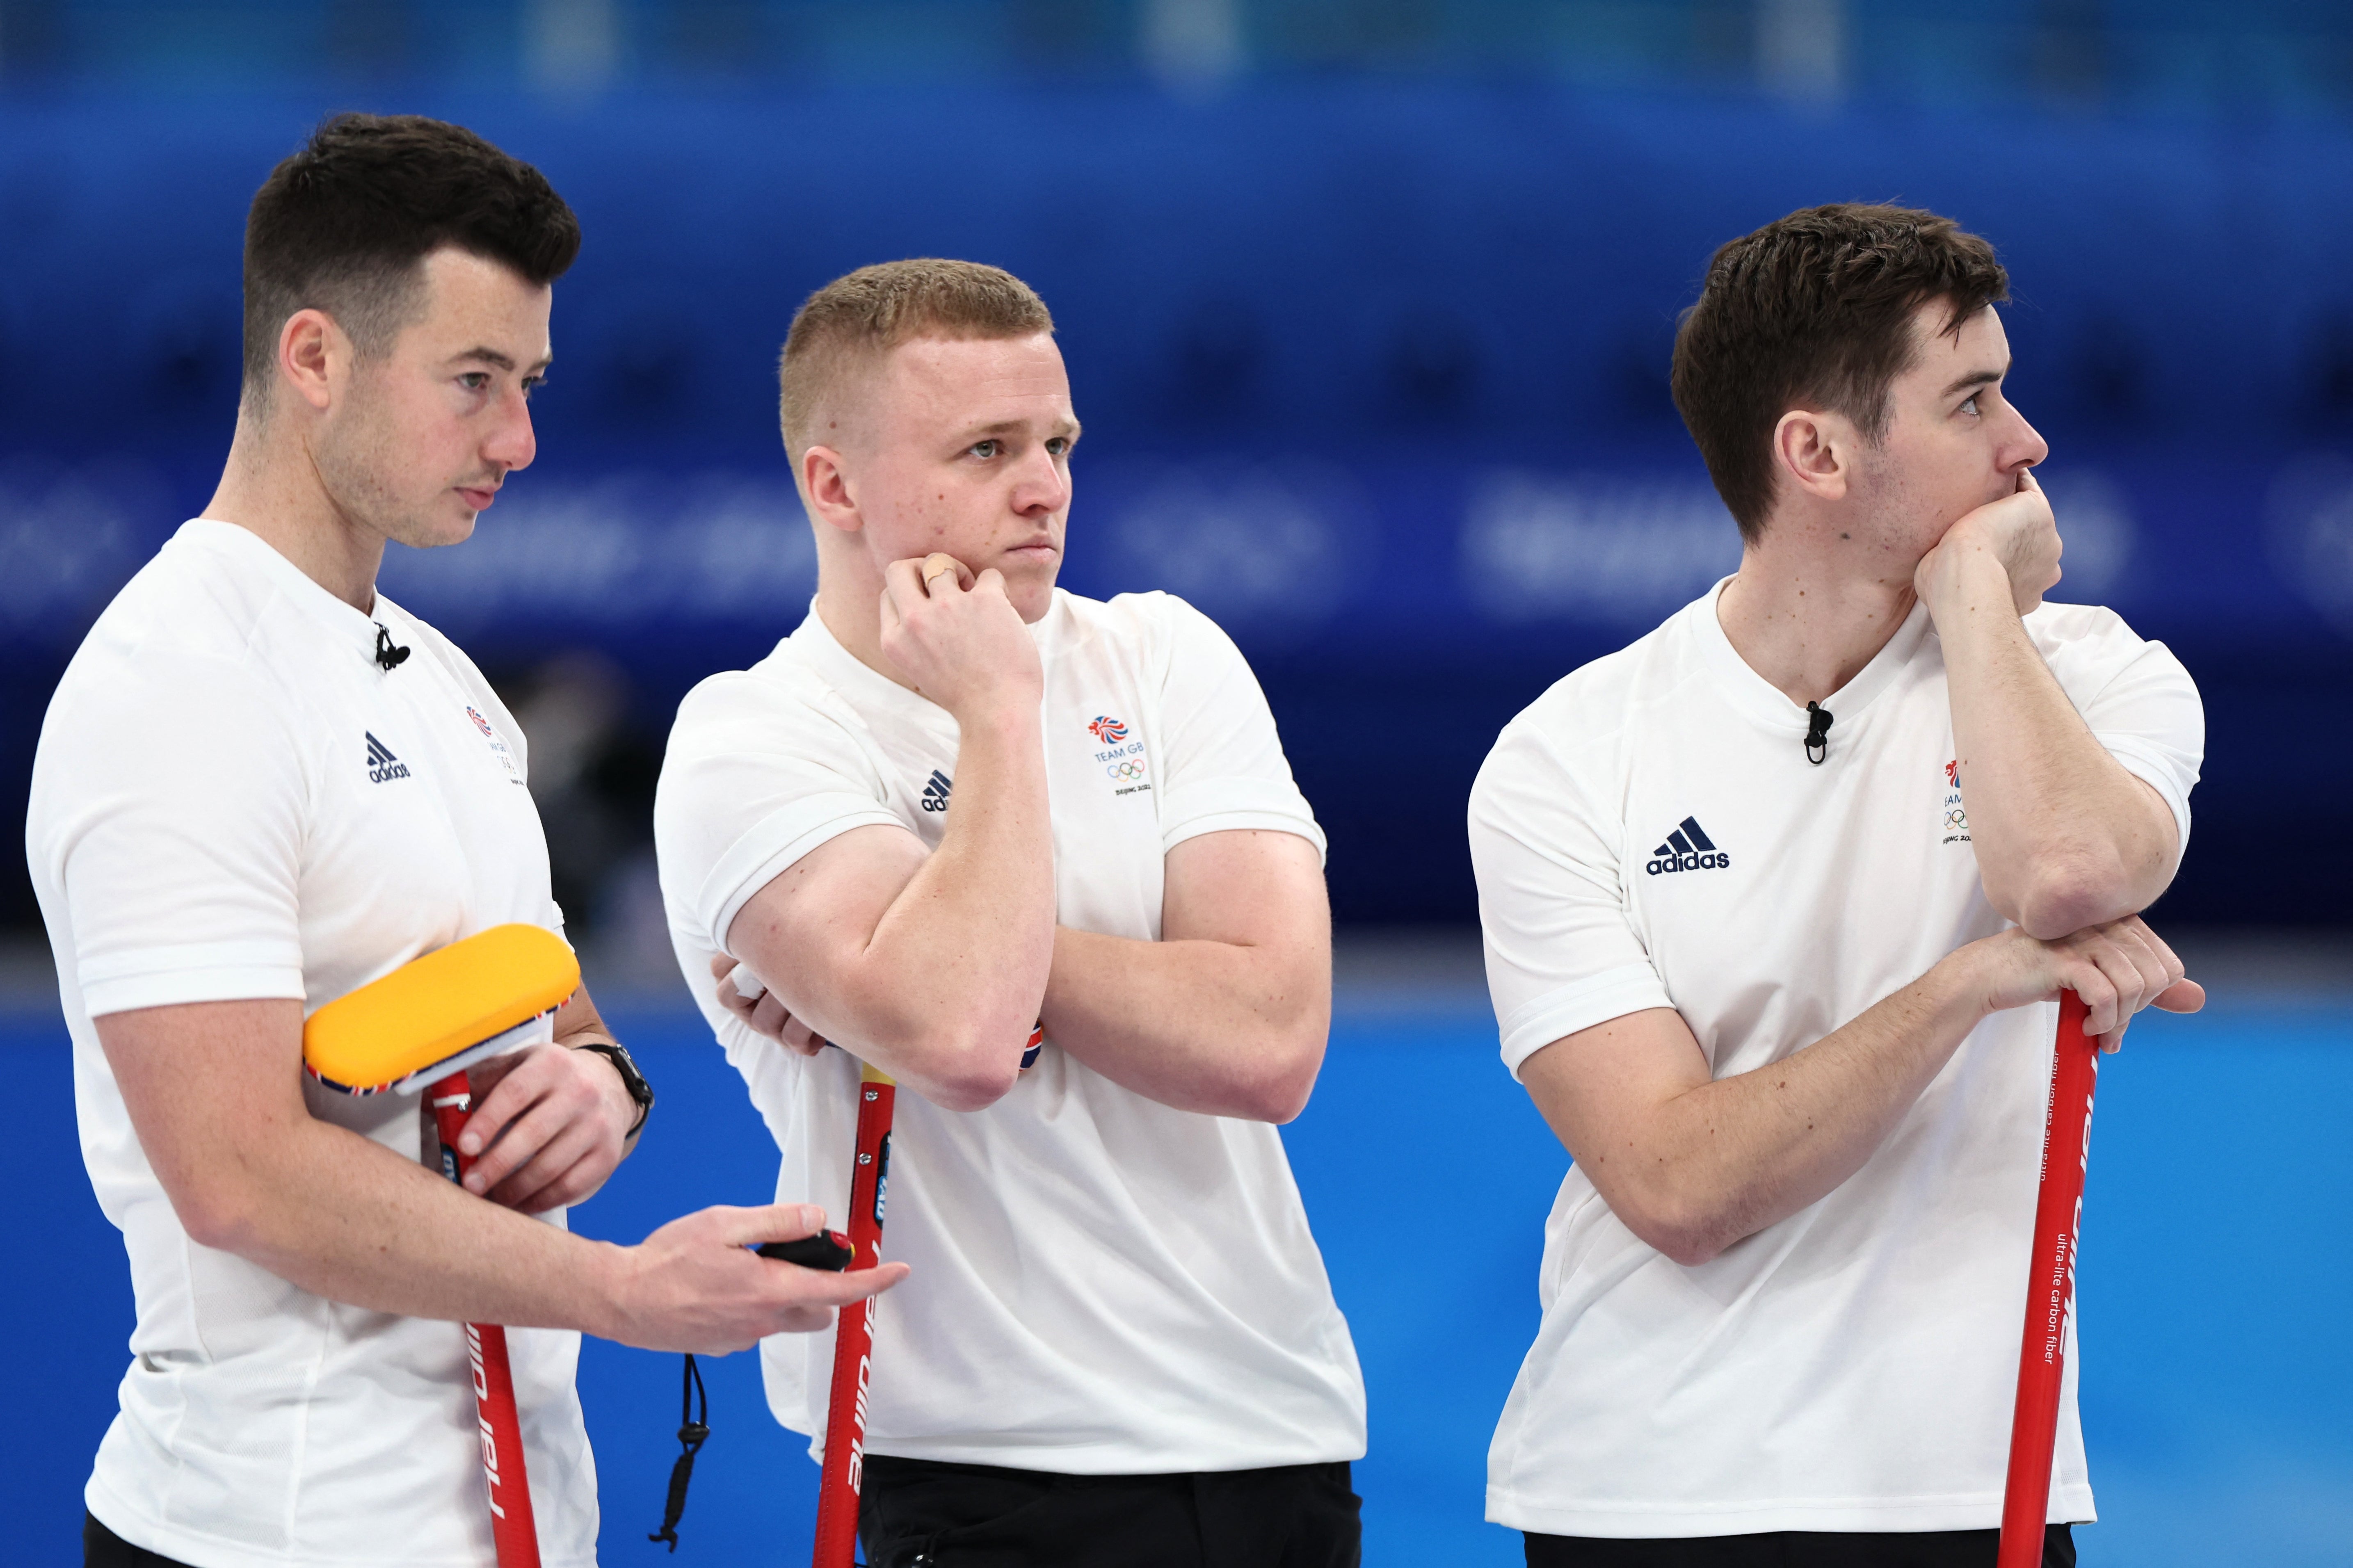 The British team react to defeat